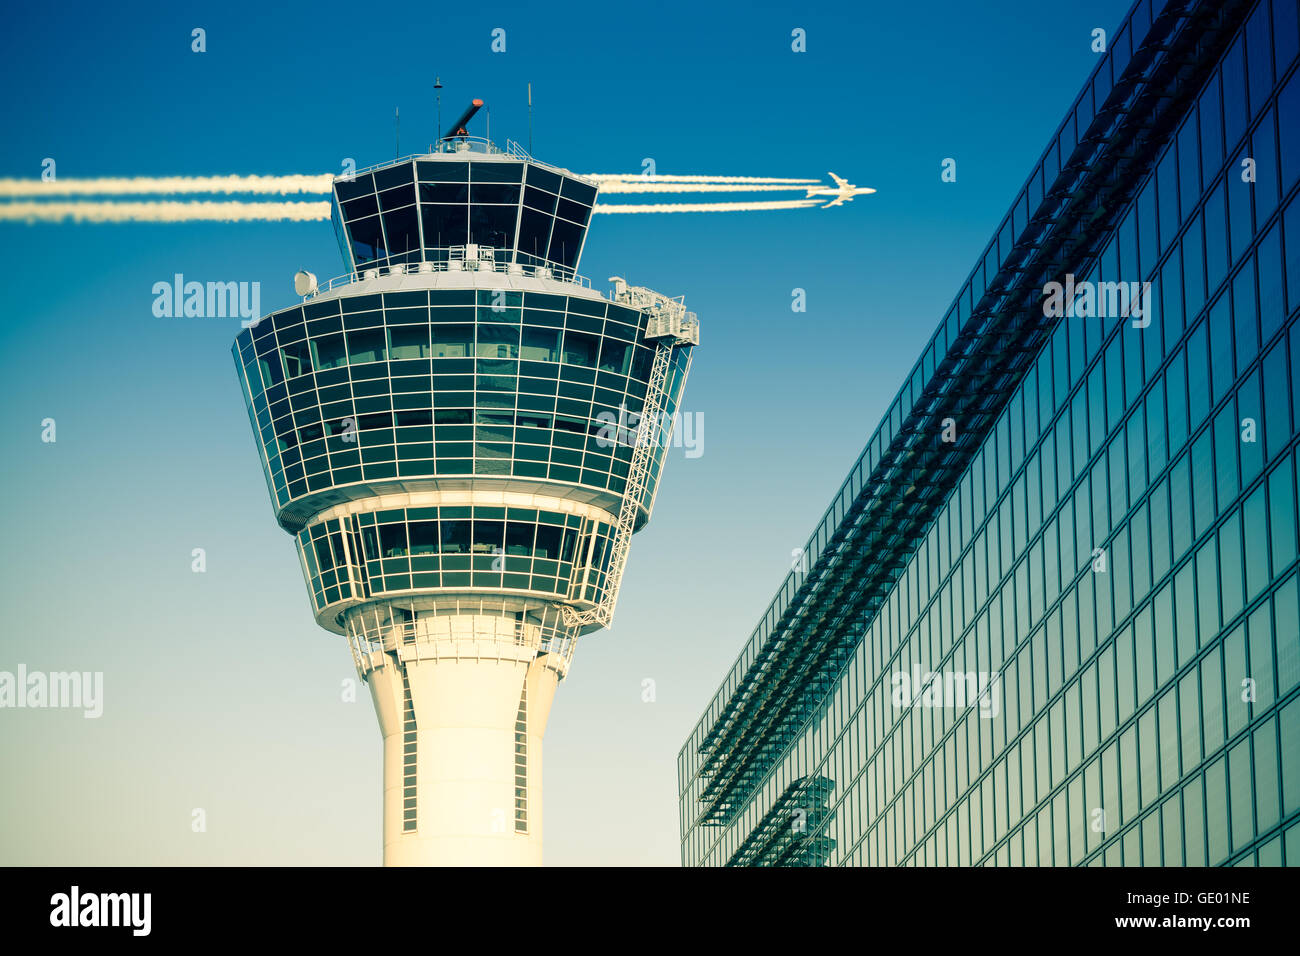 Flights management air control tower and passenger terminal in Munich international airport with flying plane in clear sky Stock Photo